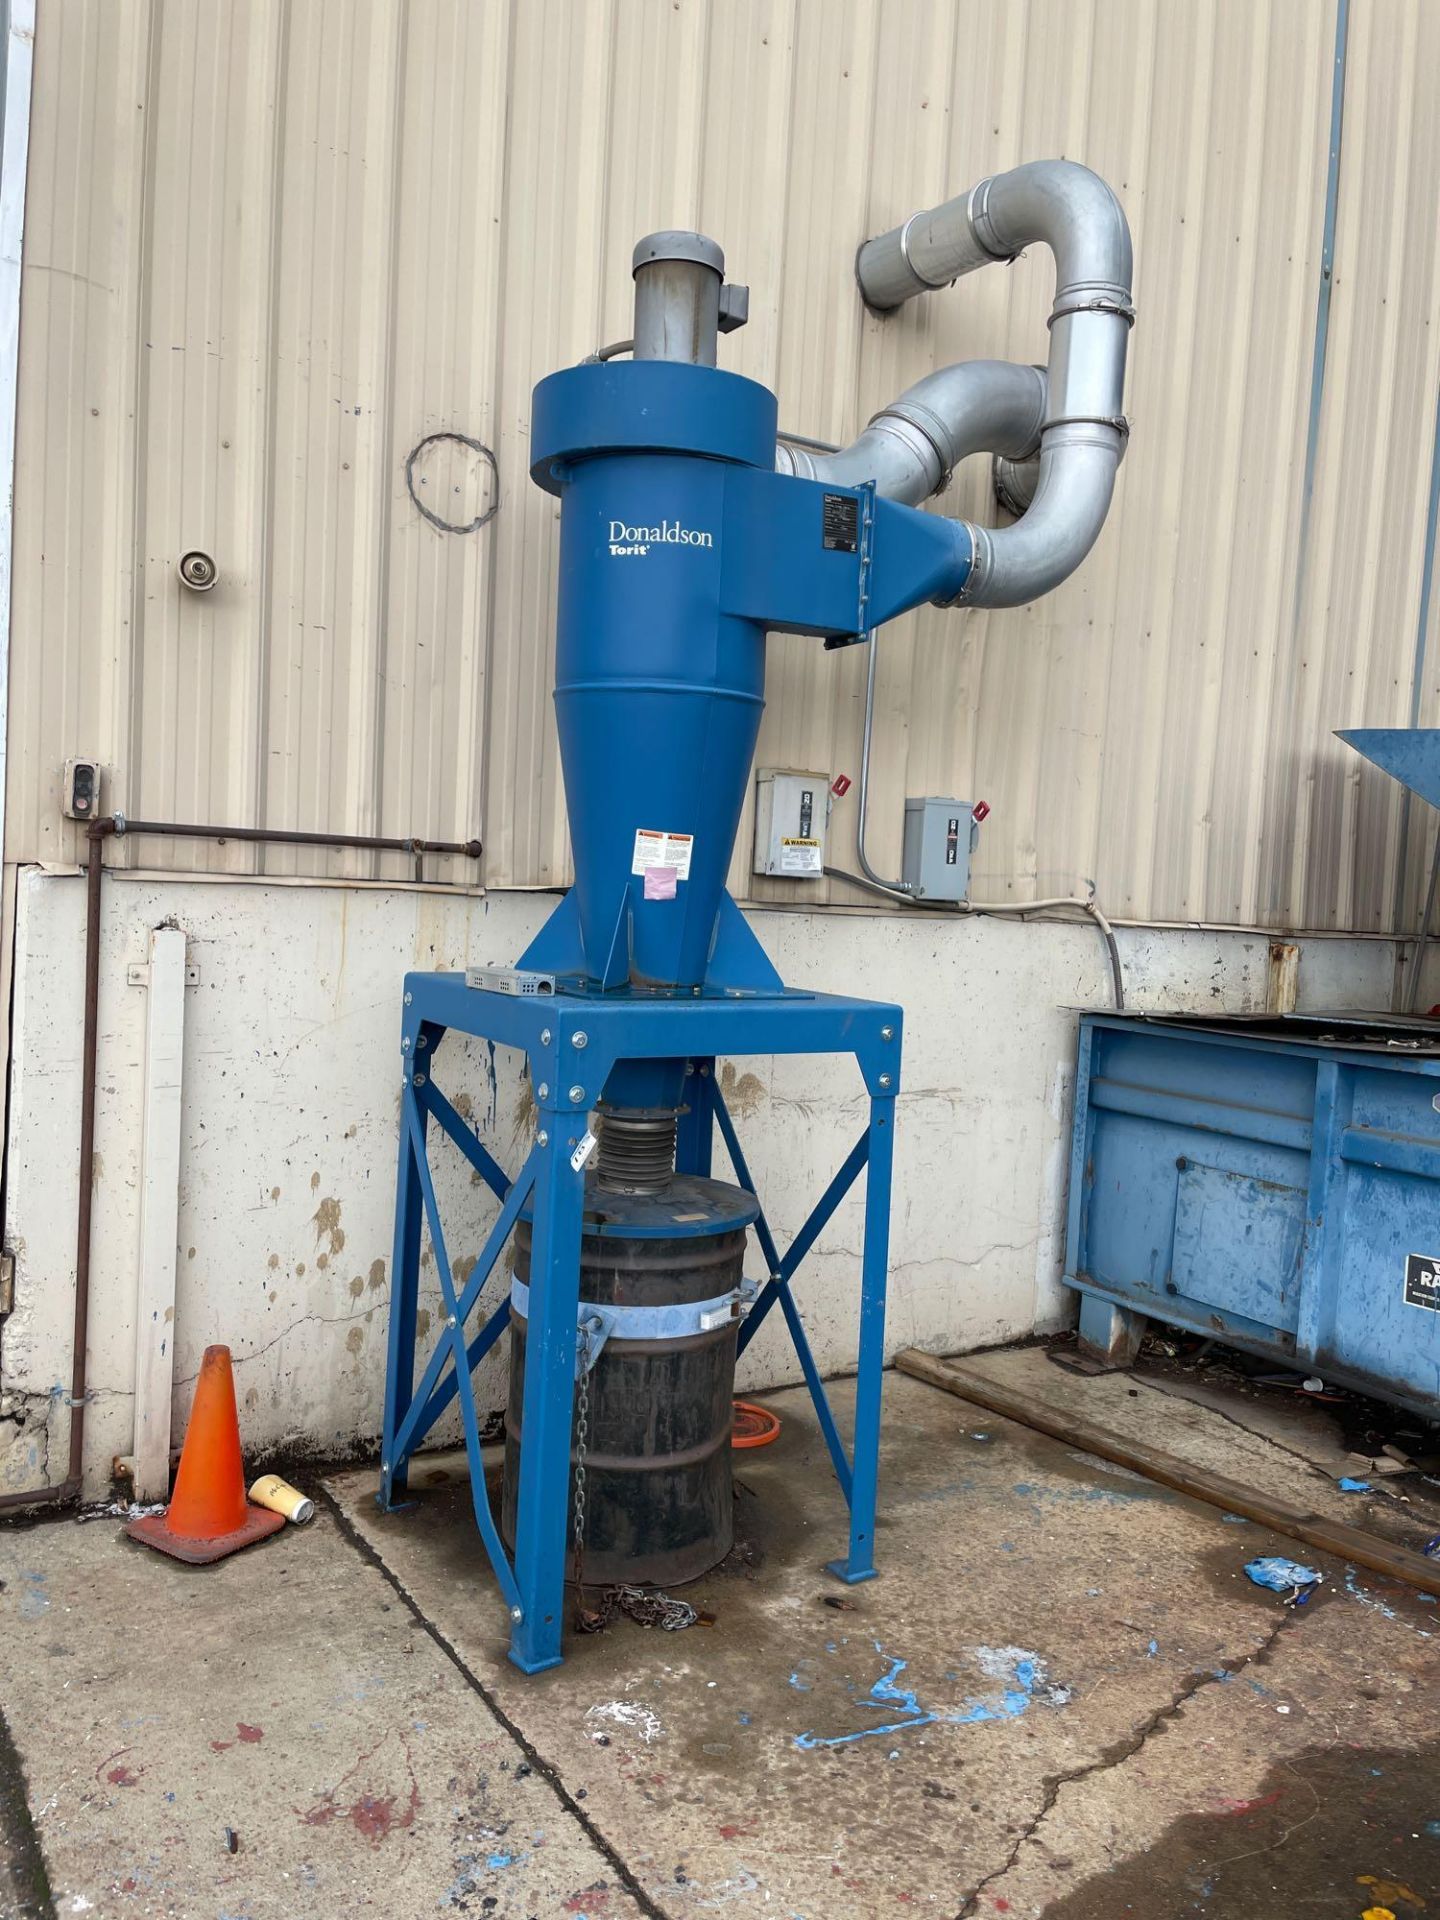 Donaldson Dust Collector - Image 2 of 4